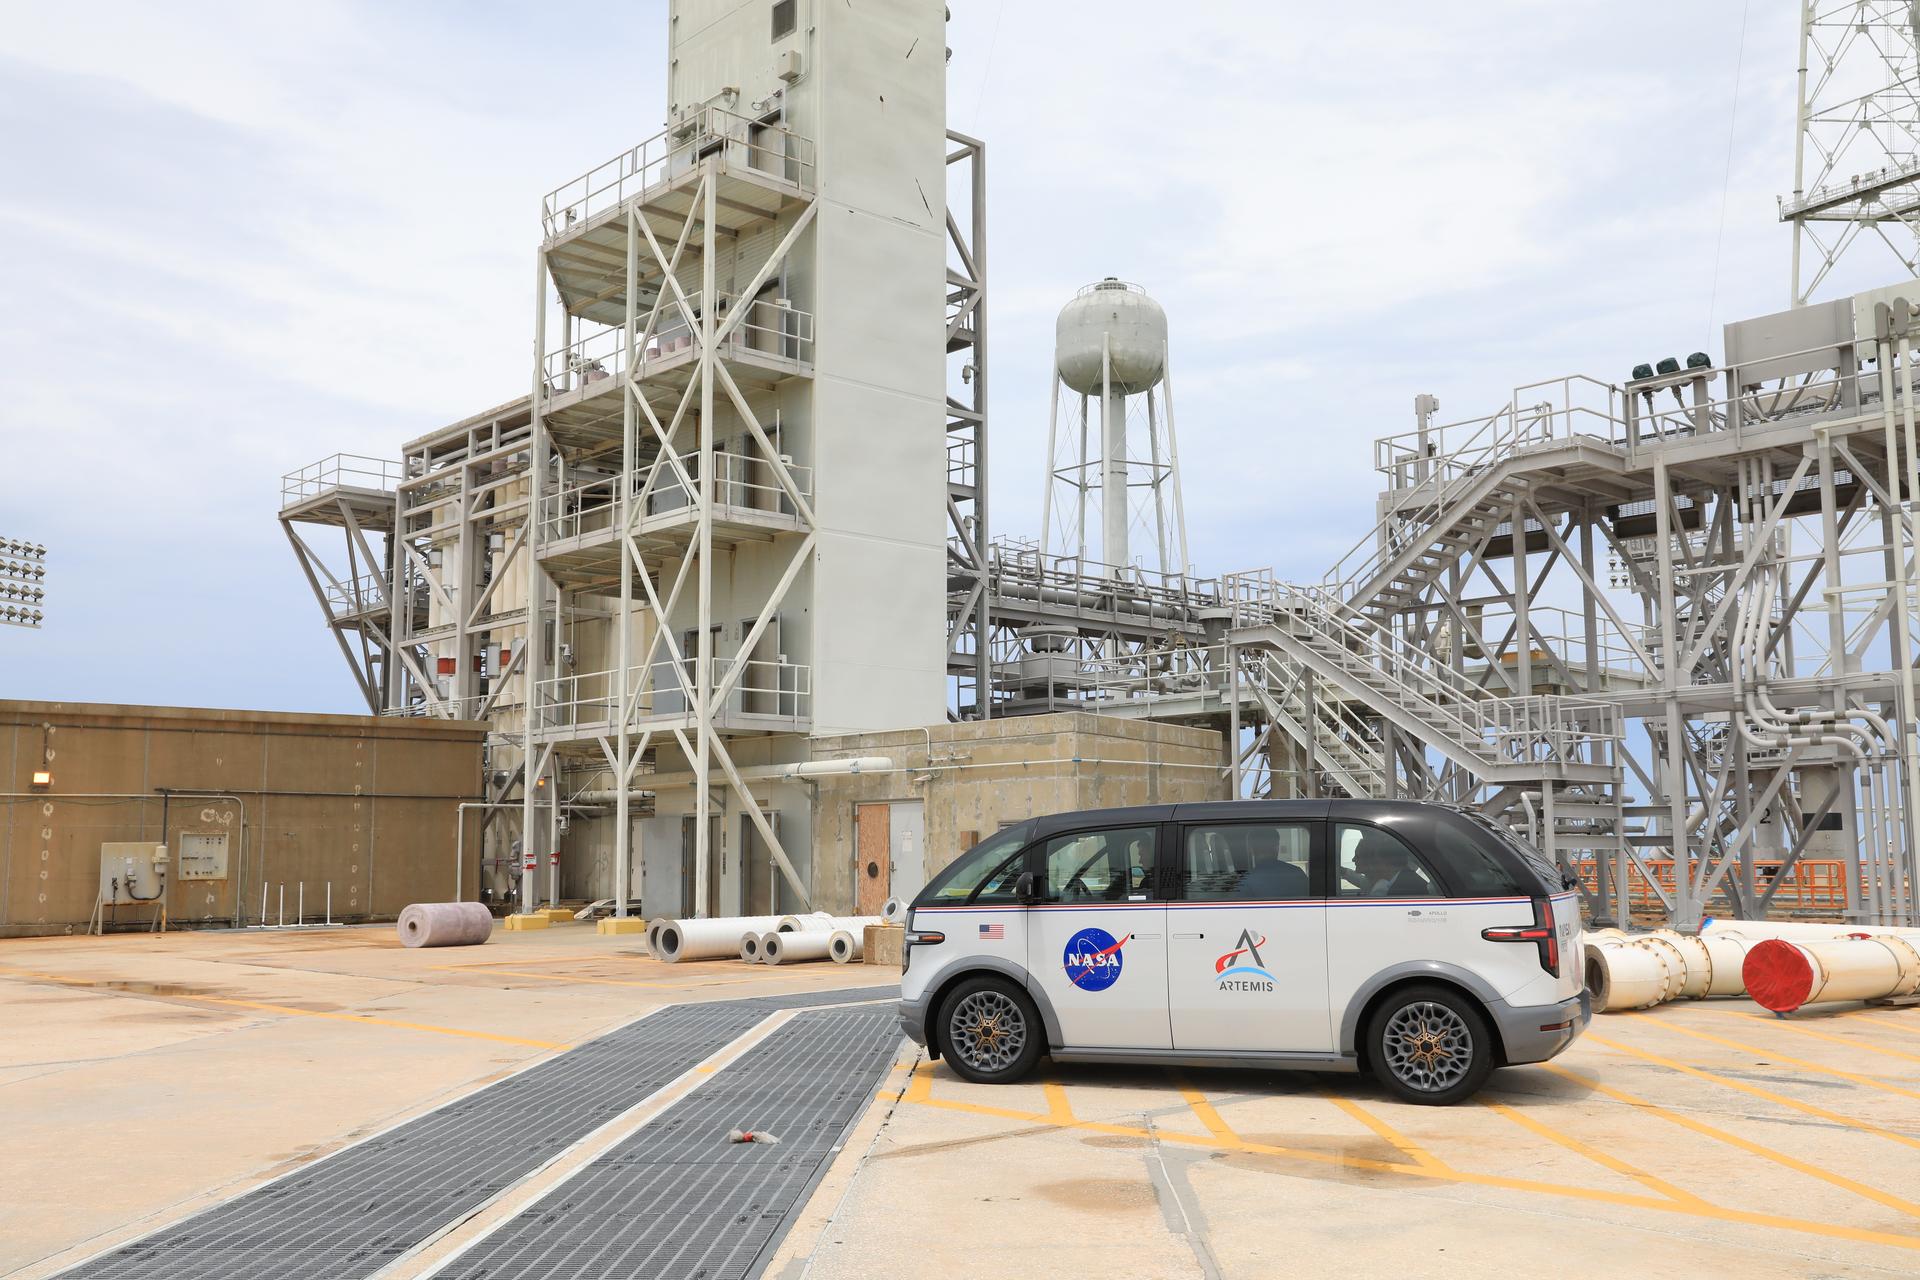 A specially designed, fully electric, environmentally friendly crew transportation vehicle for NASA’s Artemis missions is shown here at Kennedy Space Center’s Launch Pad 39B in Florida.